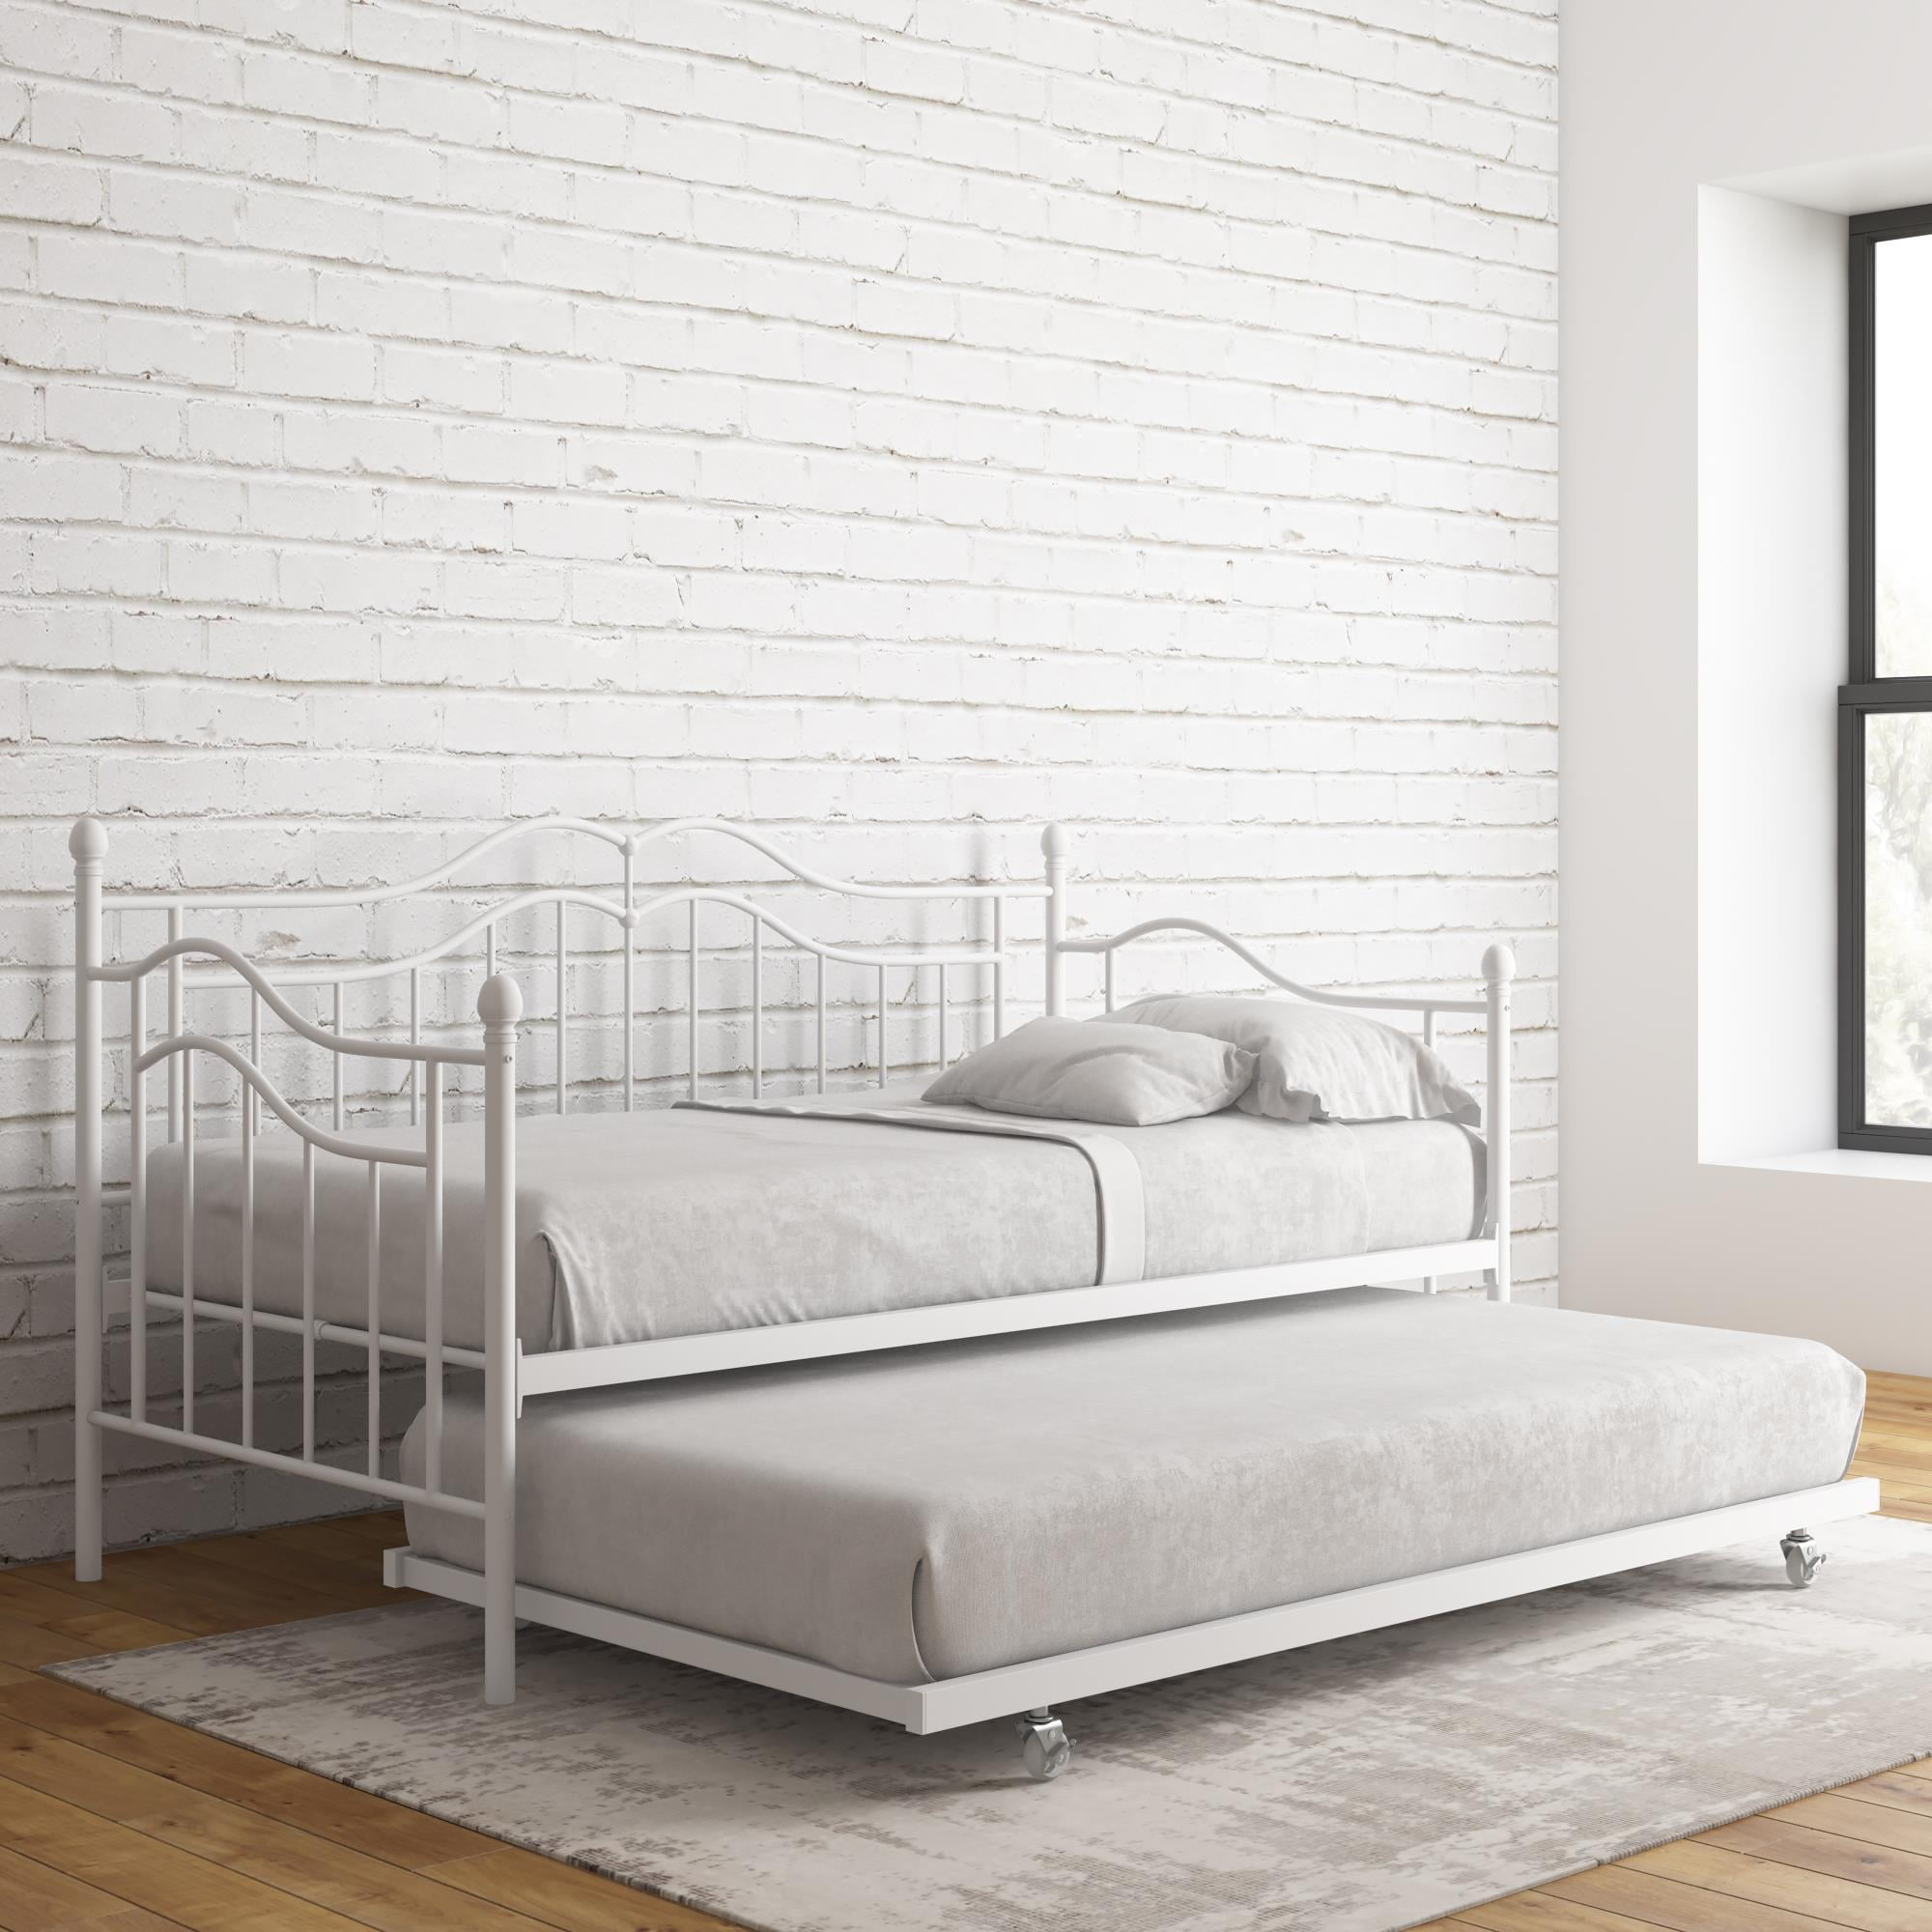 Featured image of post White Full Daybed : Product titlepremier carly white tufted wingback daybed with trundle bed, twin.